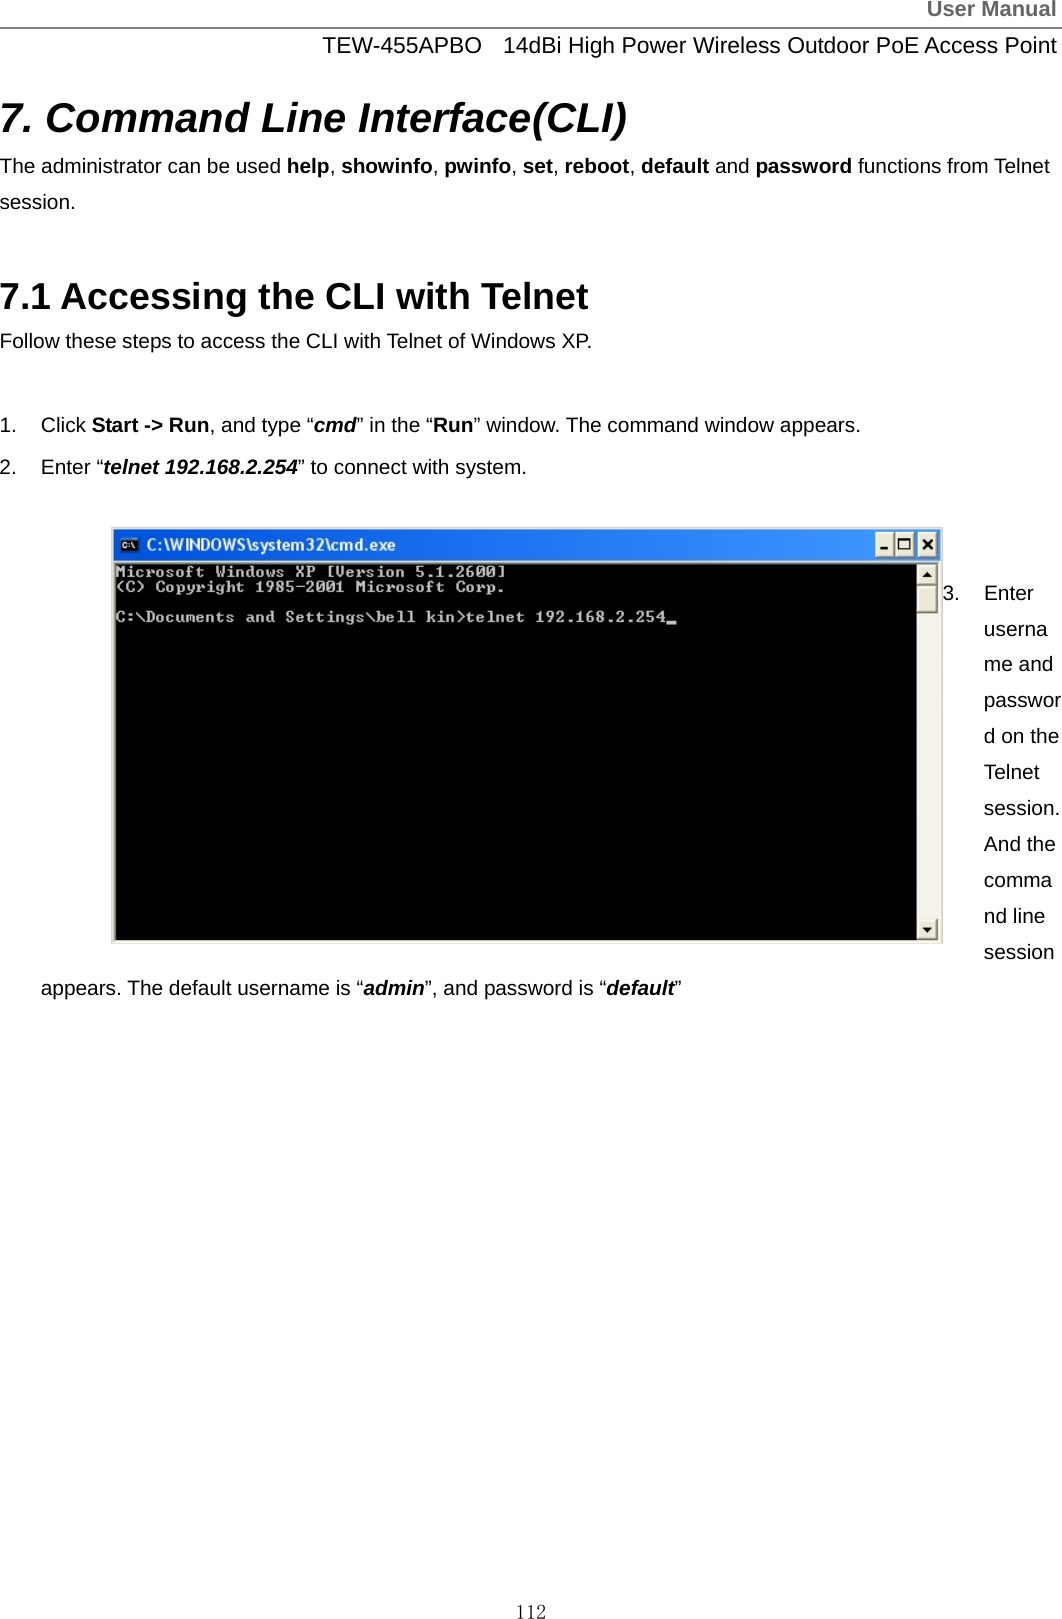 User ManualTEW-455APBO  14dBi High Power Wireless Outdoor PoE Access Point 112 7. Command Line Interface(CLI) The administrator can be used help, showinfo, pwinfo, set, reboot, default and password functions from Telnet session.  7.1 Accessing the CLI with Telnet Follow these steps to access the CLI with Telnet of Windows XP.  1. Click Start -&gt; Run, and type “cmd” in the “Run” window. The command window appears. 2. Enter “telnet 192.168.2.254” to connect with system.   3. Enter username and password on the Telnet session. And the command line session appears. The default username is “admin”, and password is “default”  